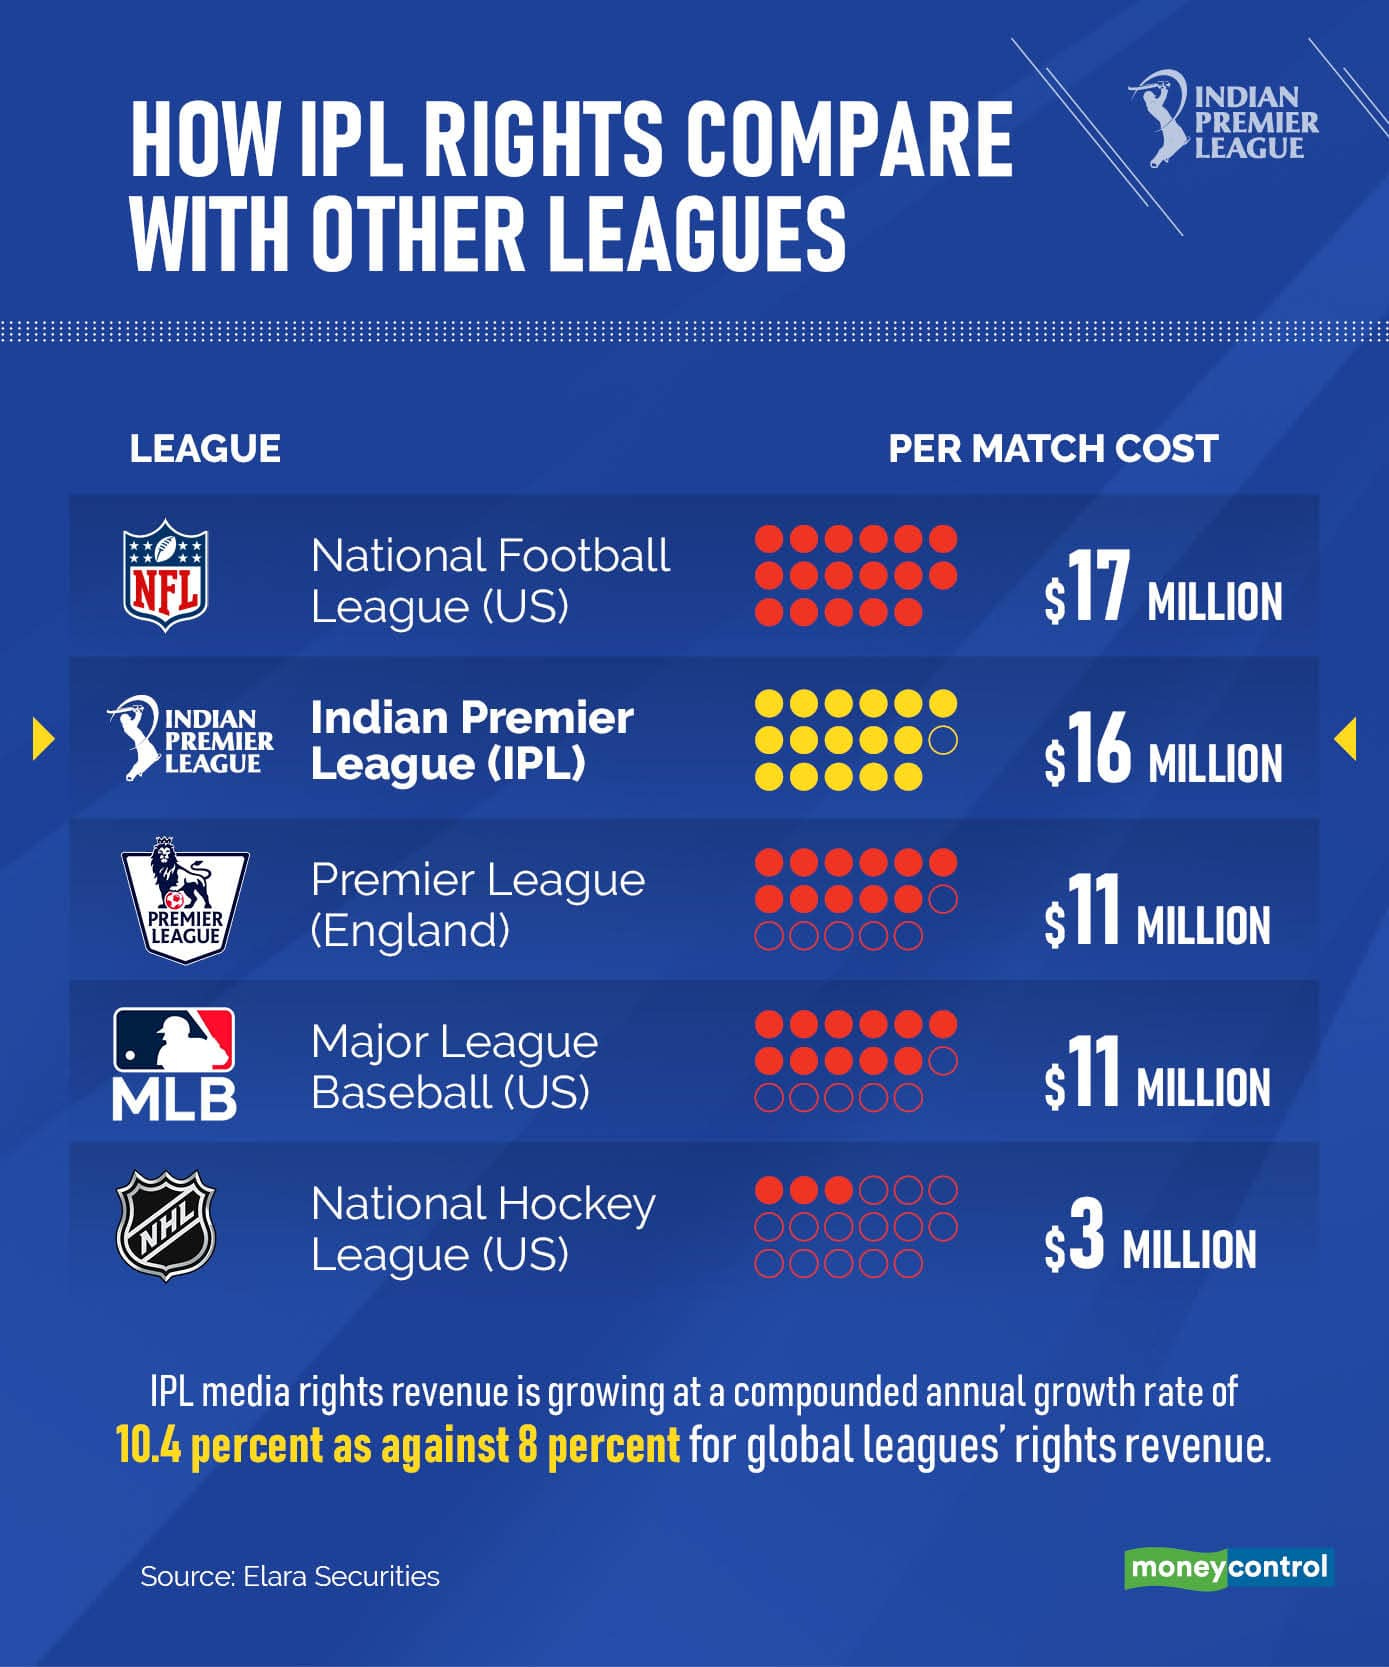 Story in Charts | The rise of IPL to the world's second most valuable  sports league